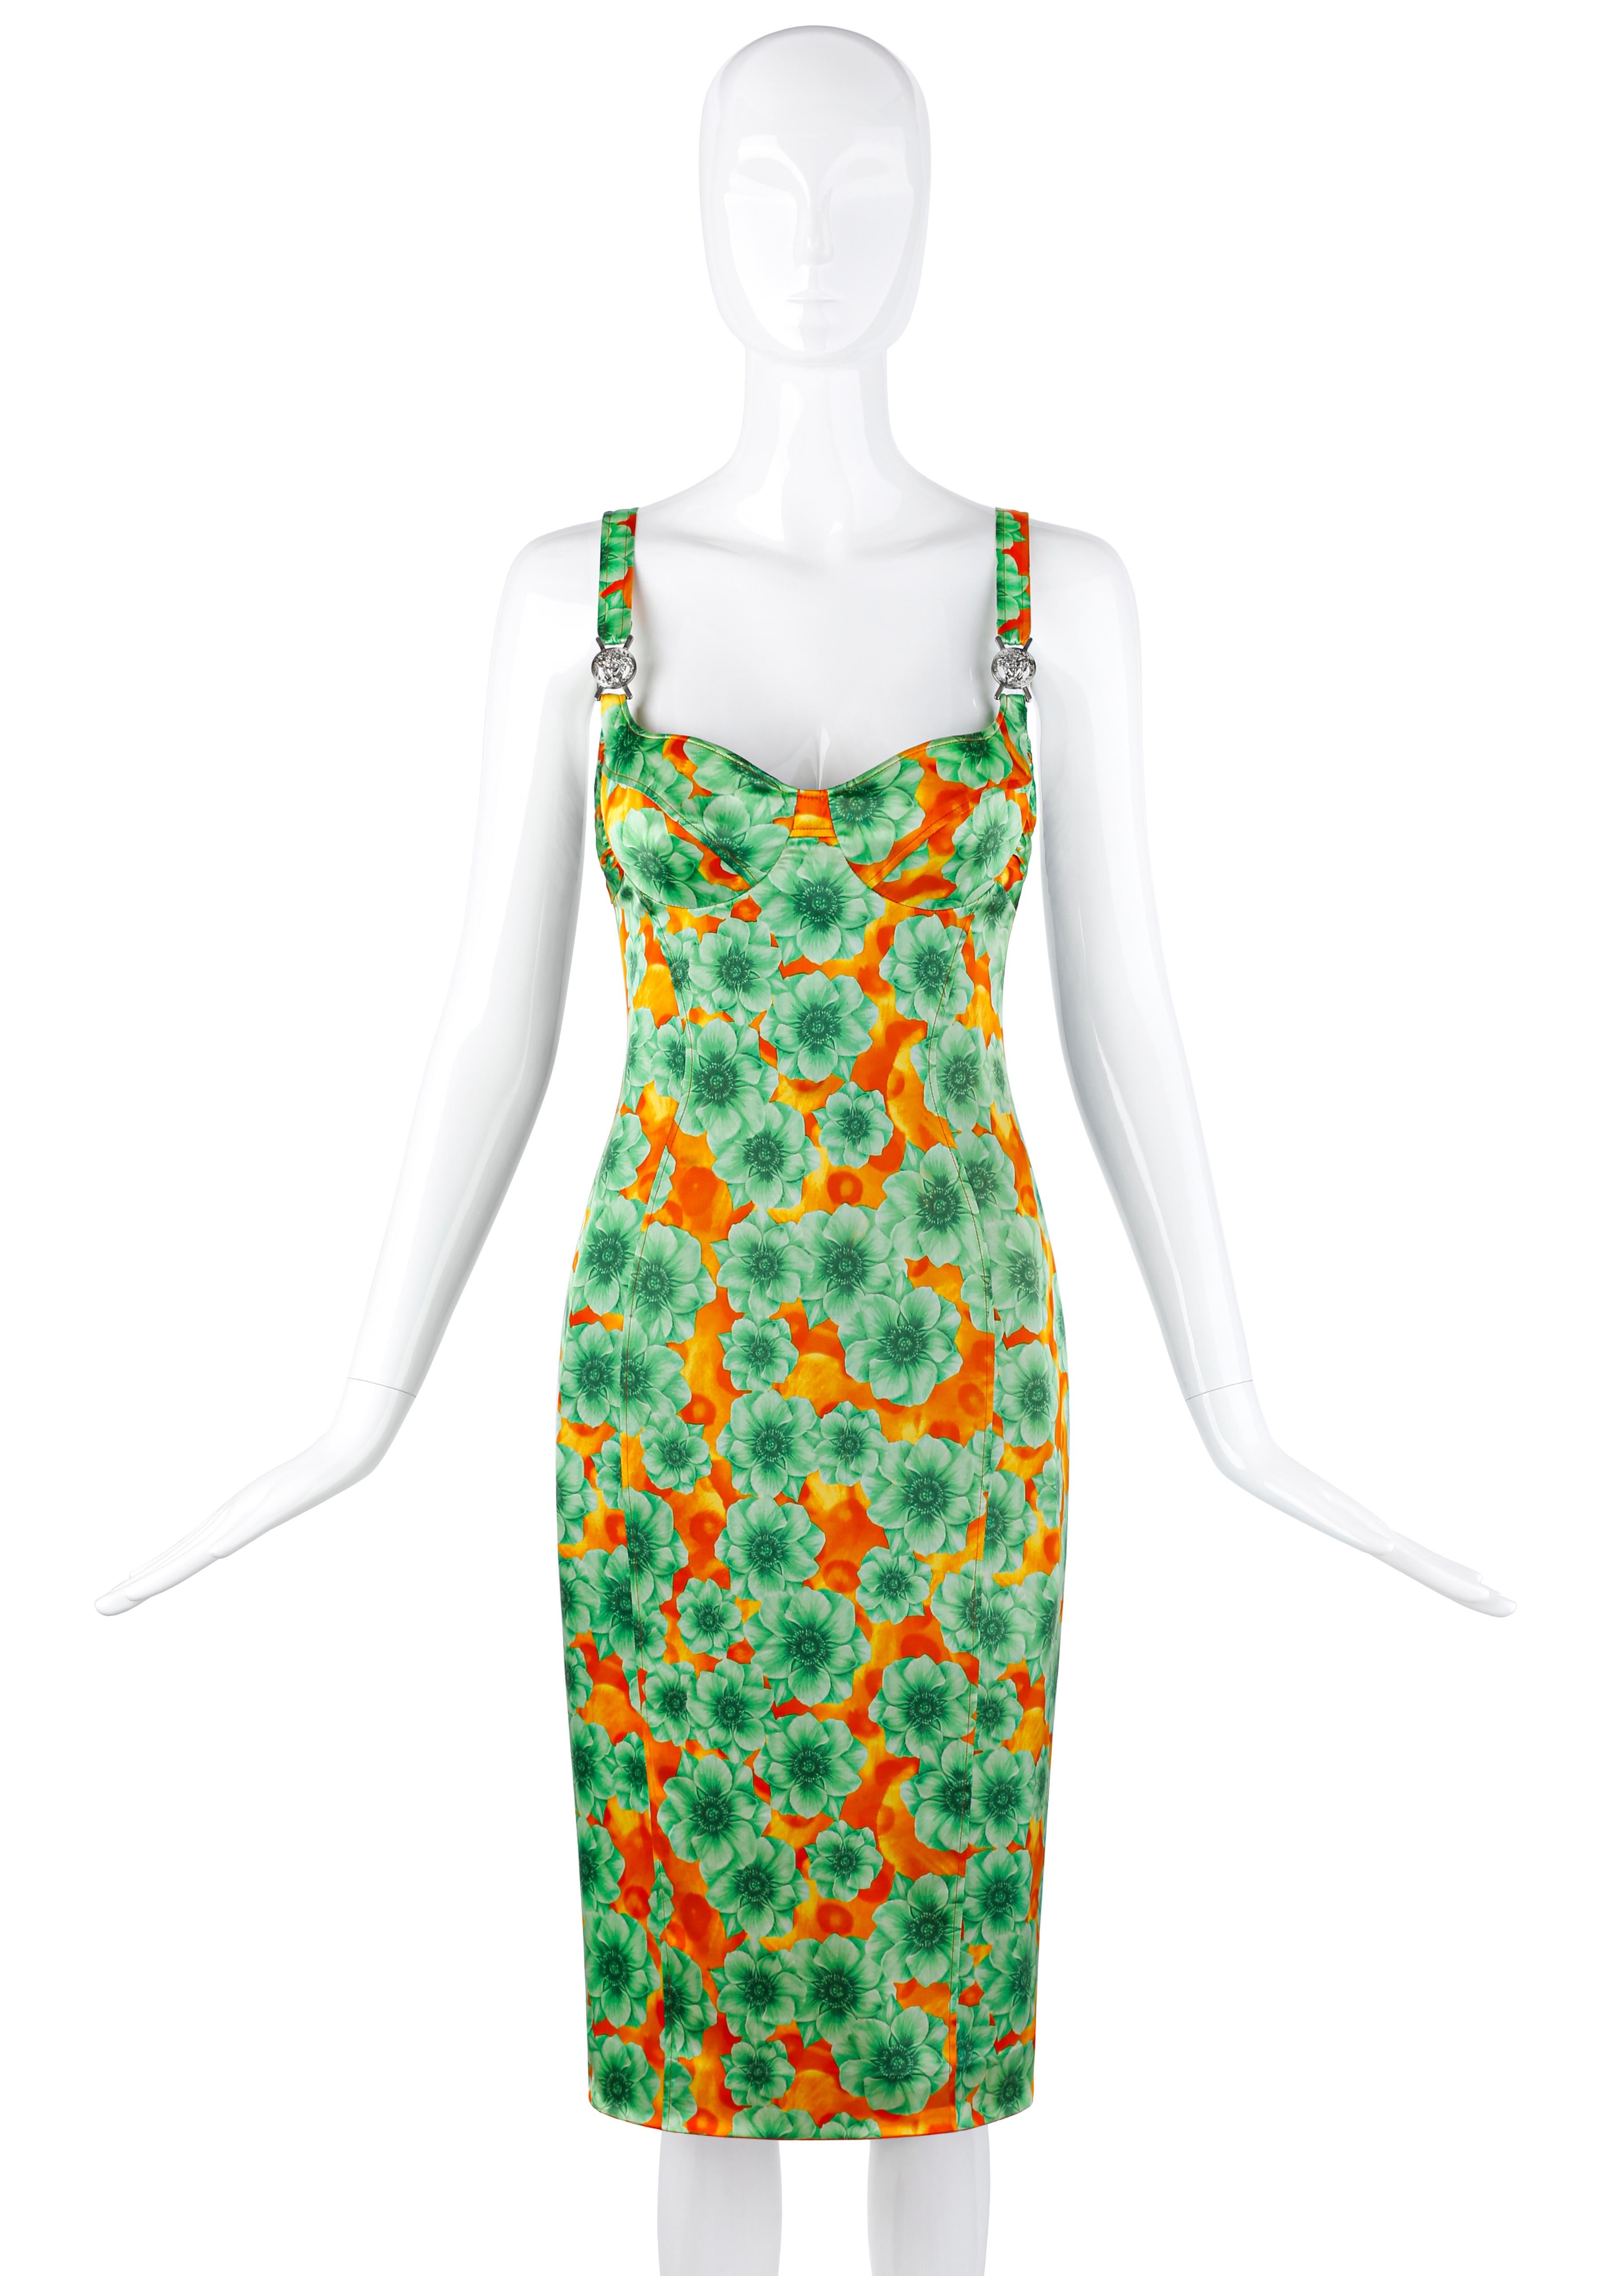 Designed by Donatella Versace circa early 2000's. Vibrant color palette of overlapping green and orange tones. Graphic floral print is collaged as visual art and includes larger green flowers in forefront with orange flowers in the background;